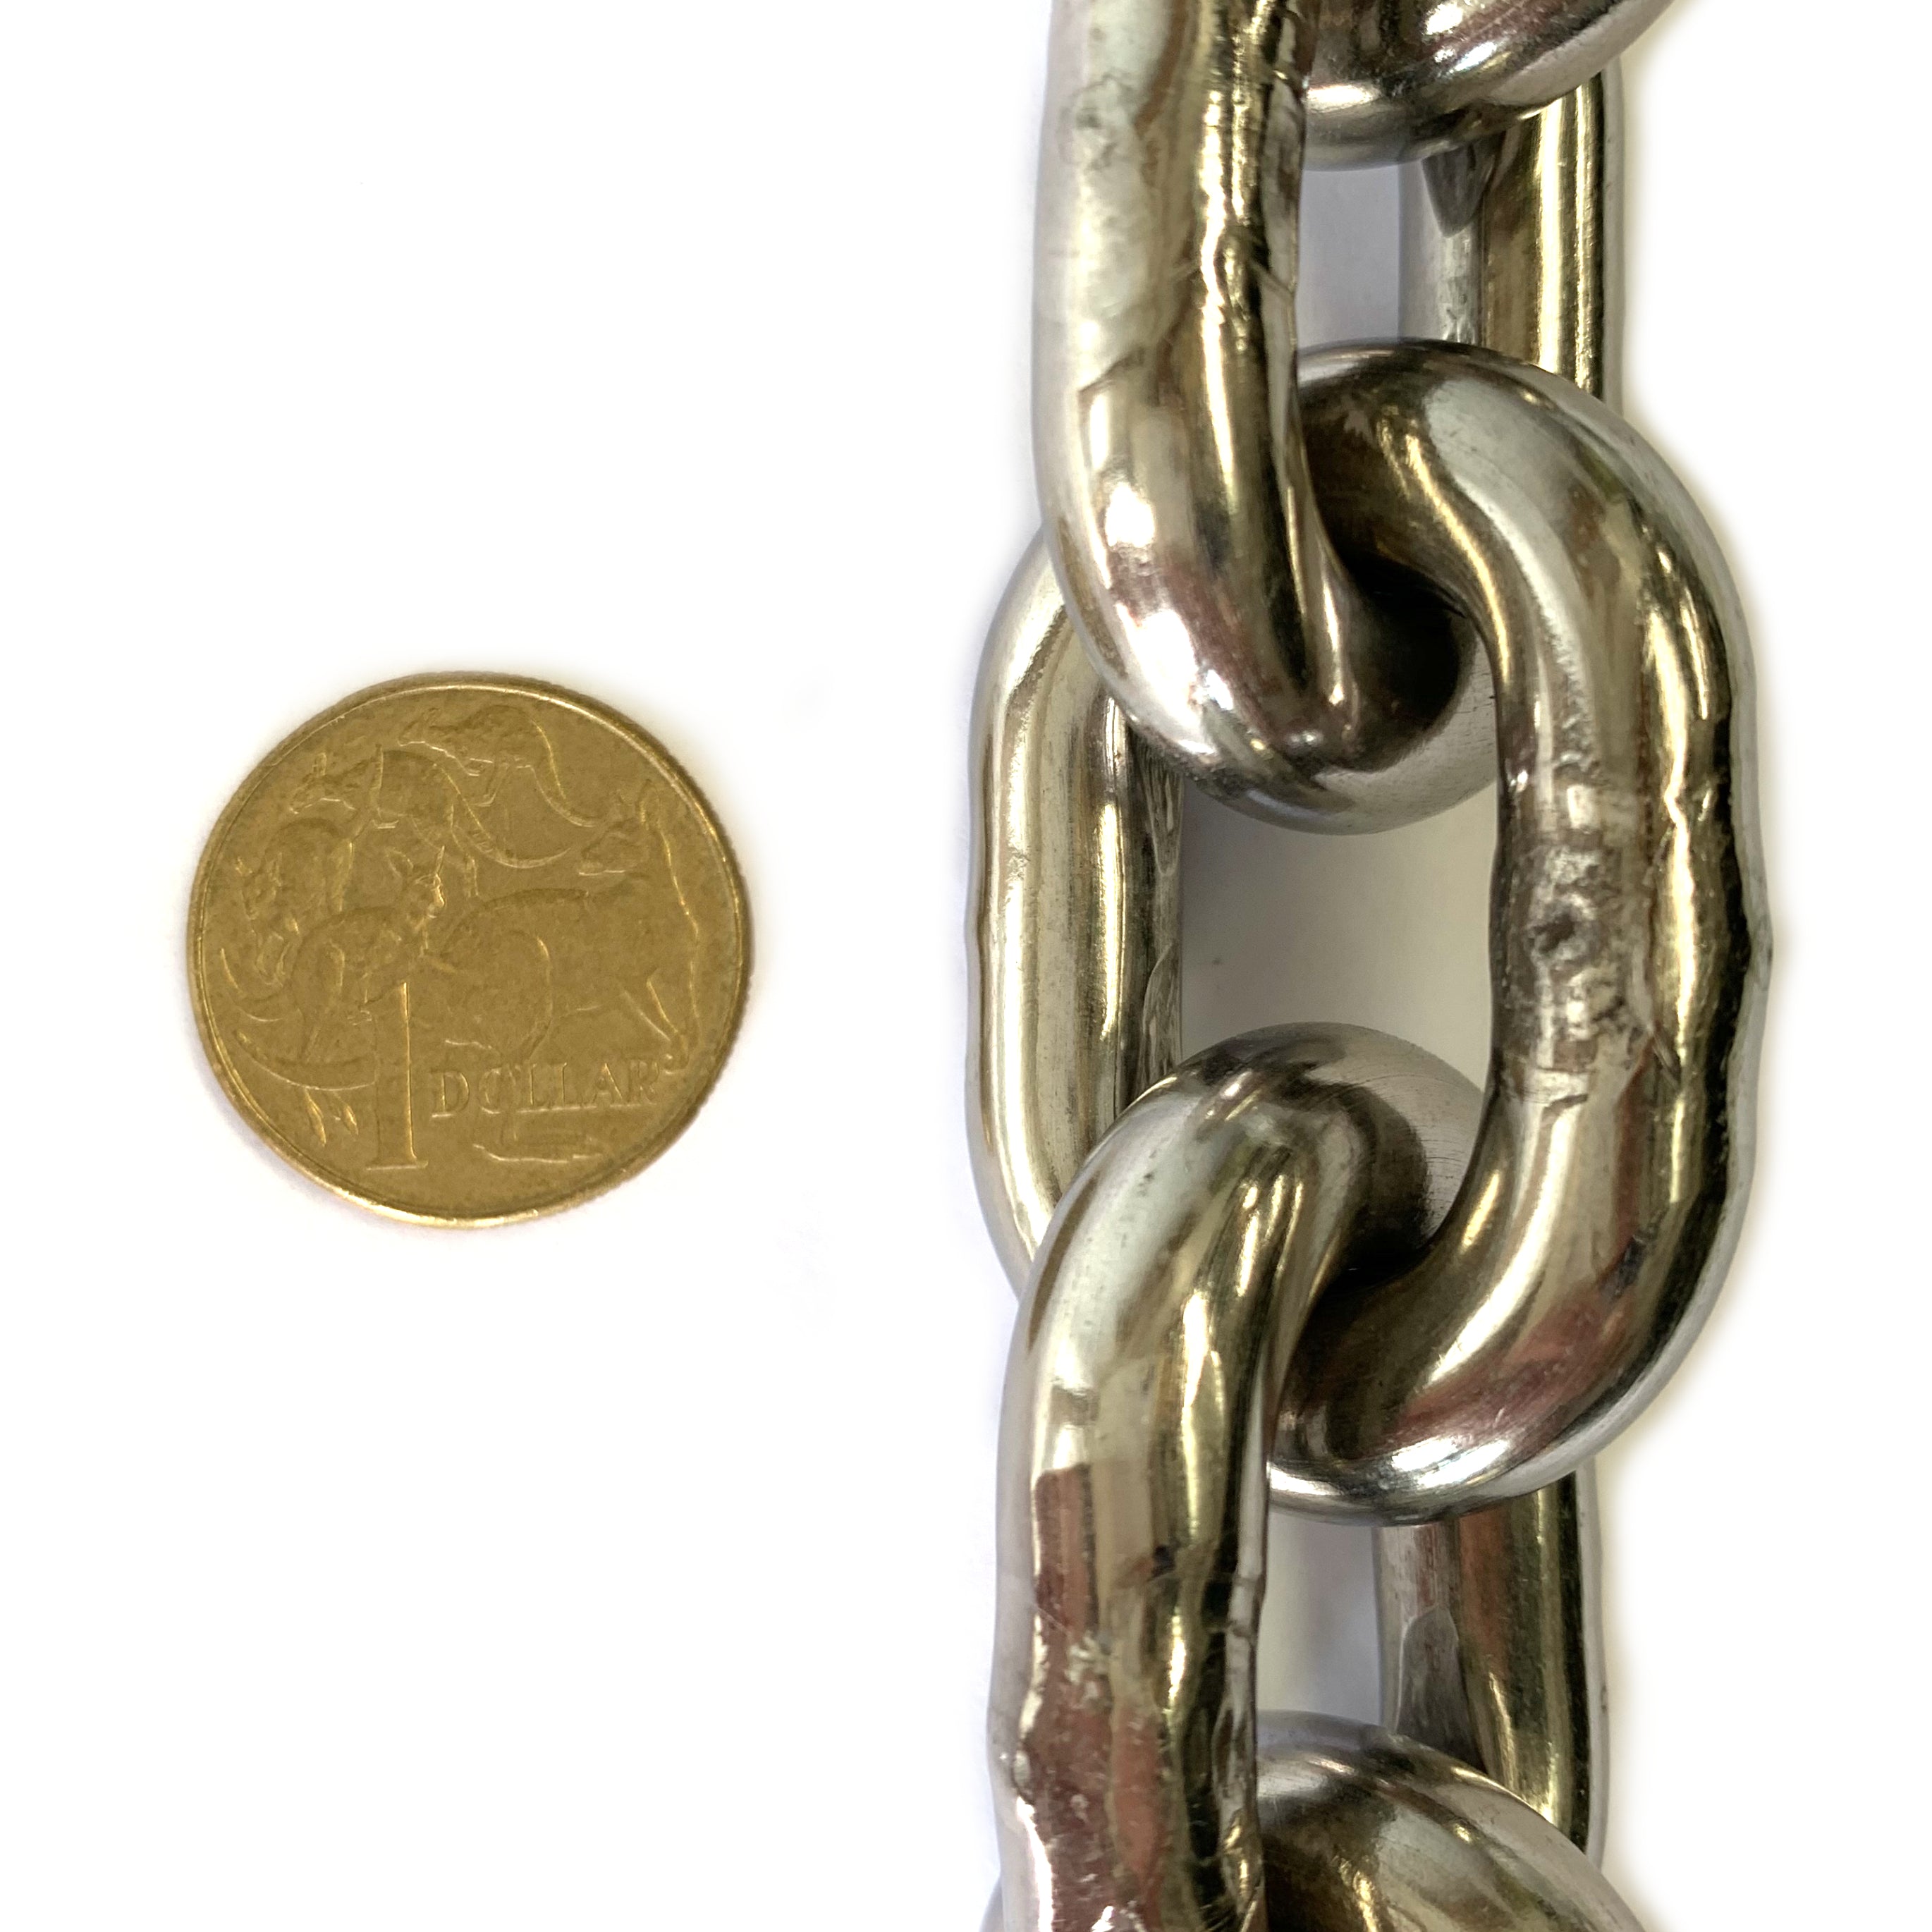 10mm stainless steel welded short link chain in a 25kg bucket with 10.4m of chain. Australia.